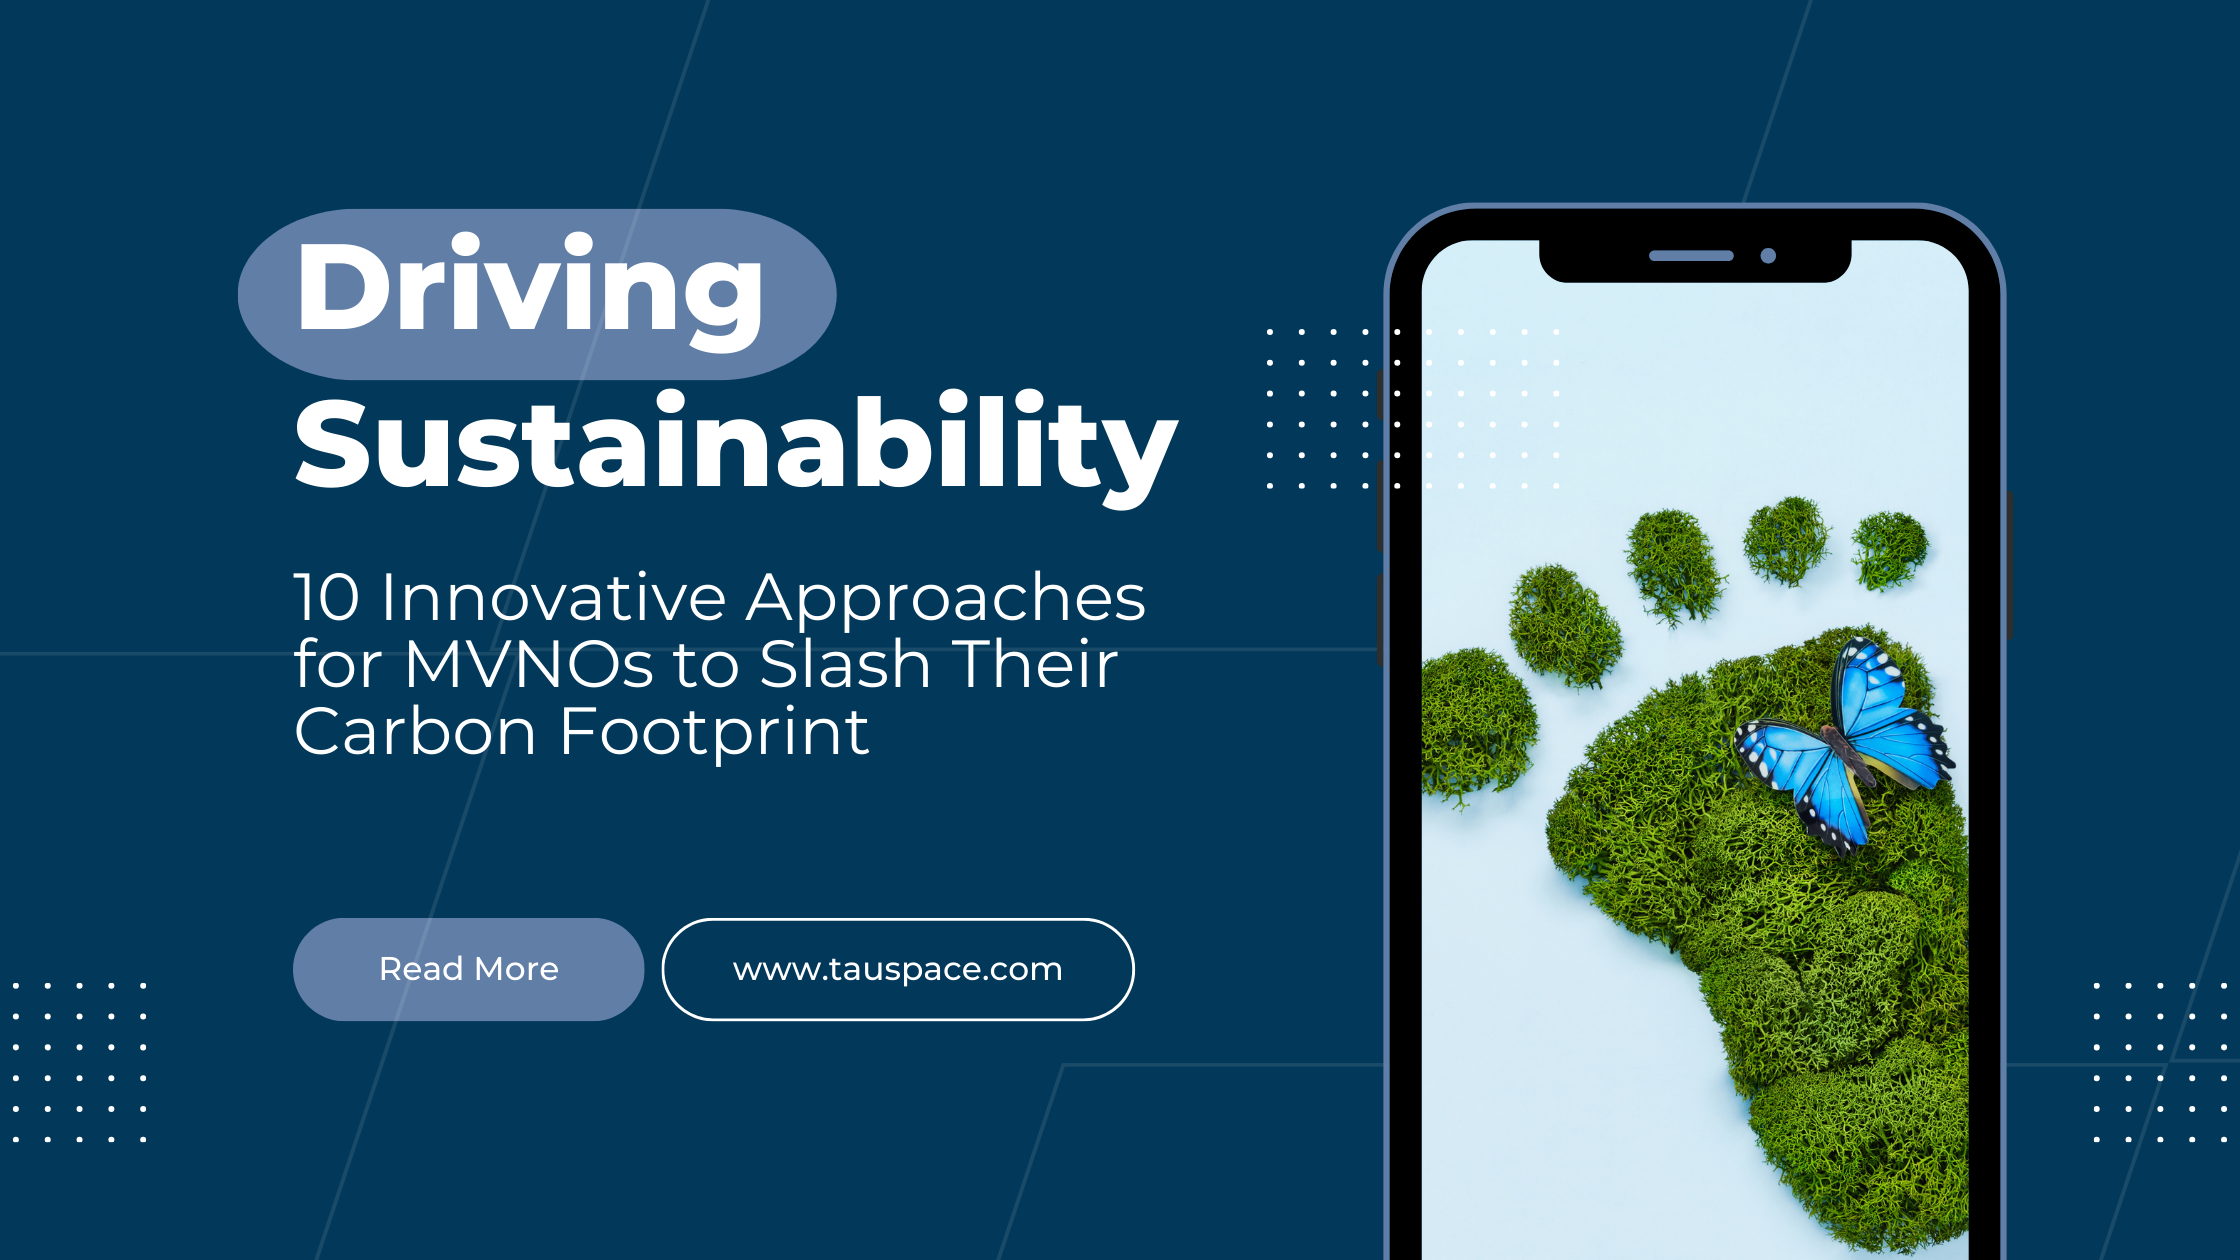 Driving Sustainability: Innovative Approaches for MVNOs to Slash Carbon Footprint